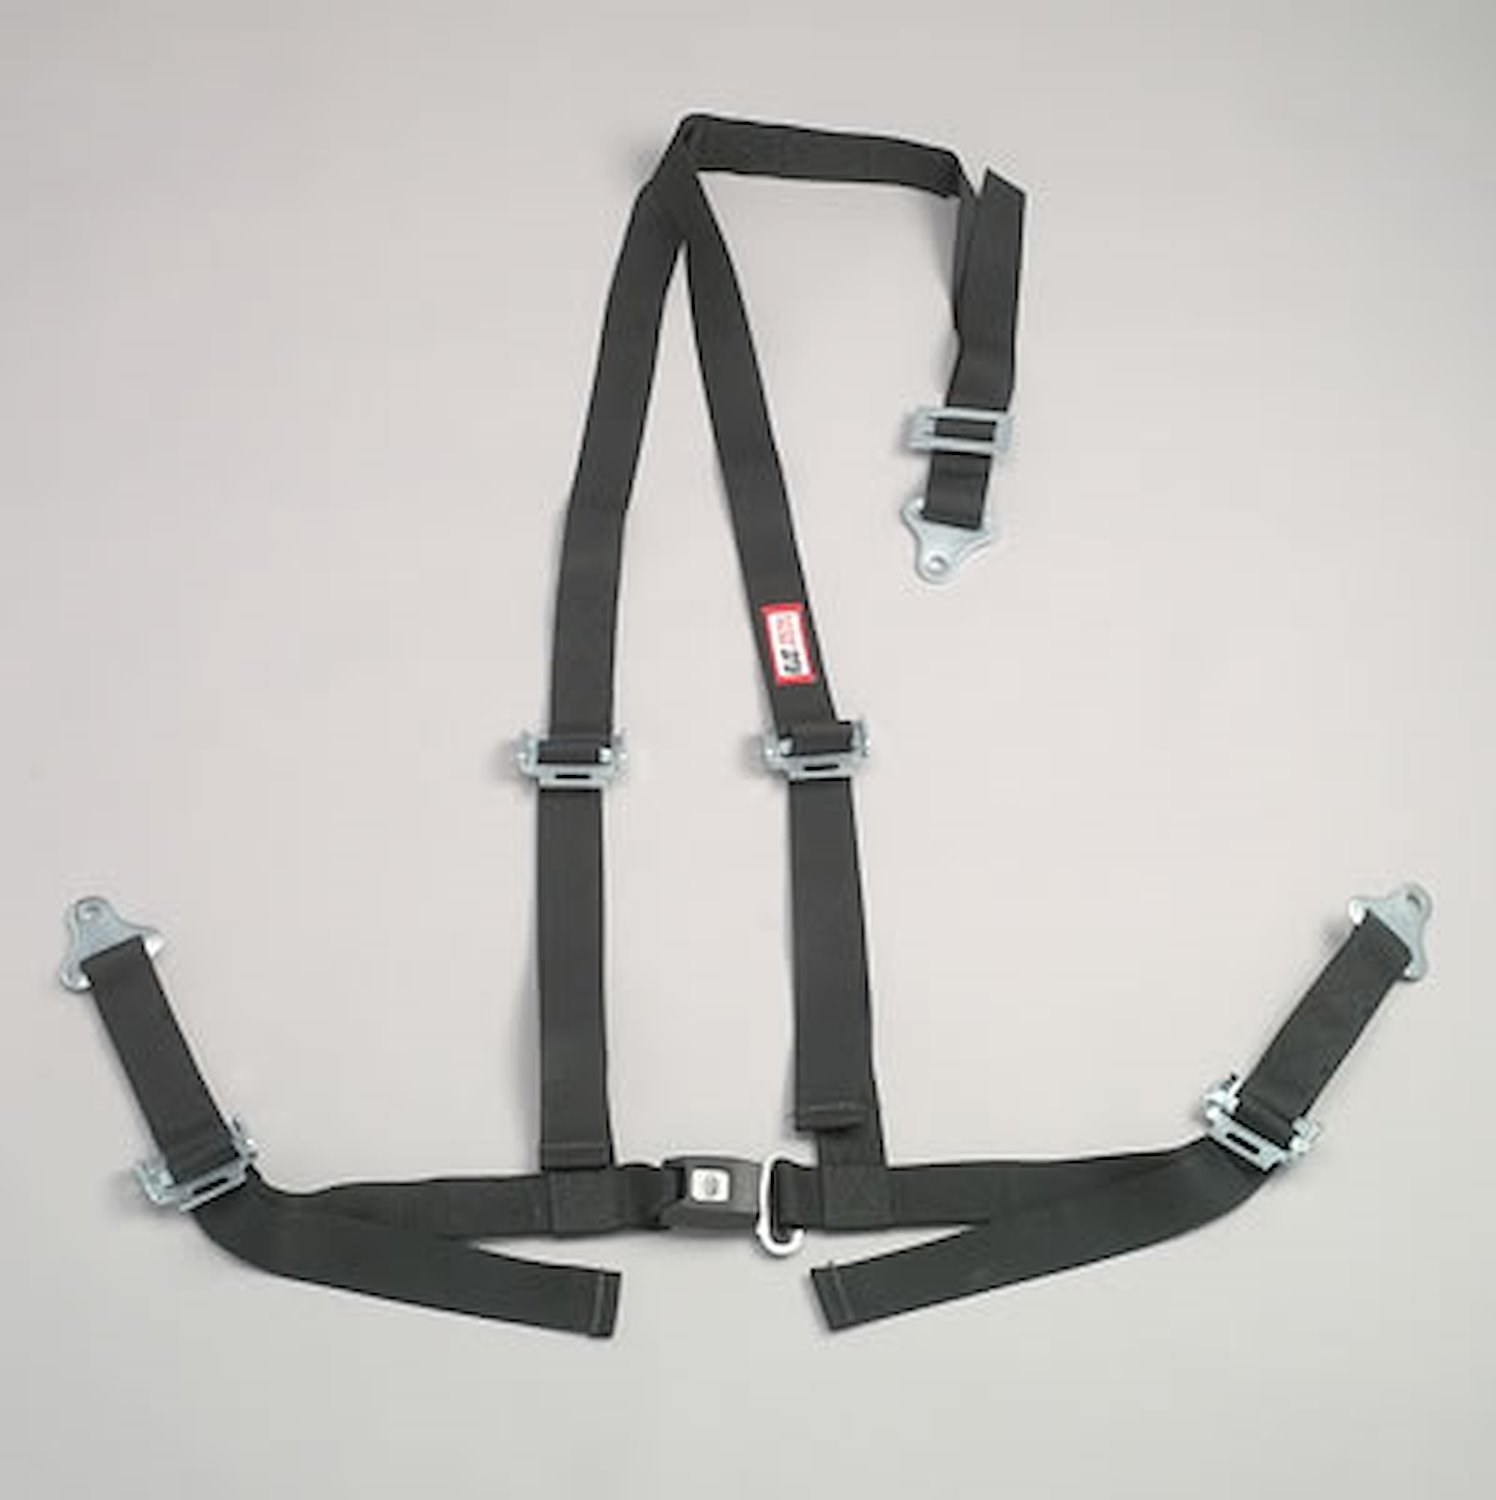 NON-SFI B&T HARNESS 2 PULL DOWN Lap Belt SNAP 2 S. H. Individual ROLL BAR Mount WRAP/SNAP w/STERNUM STRAP YELLOW